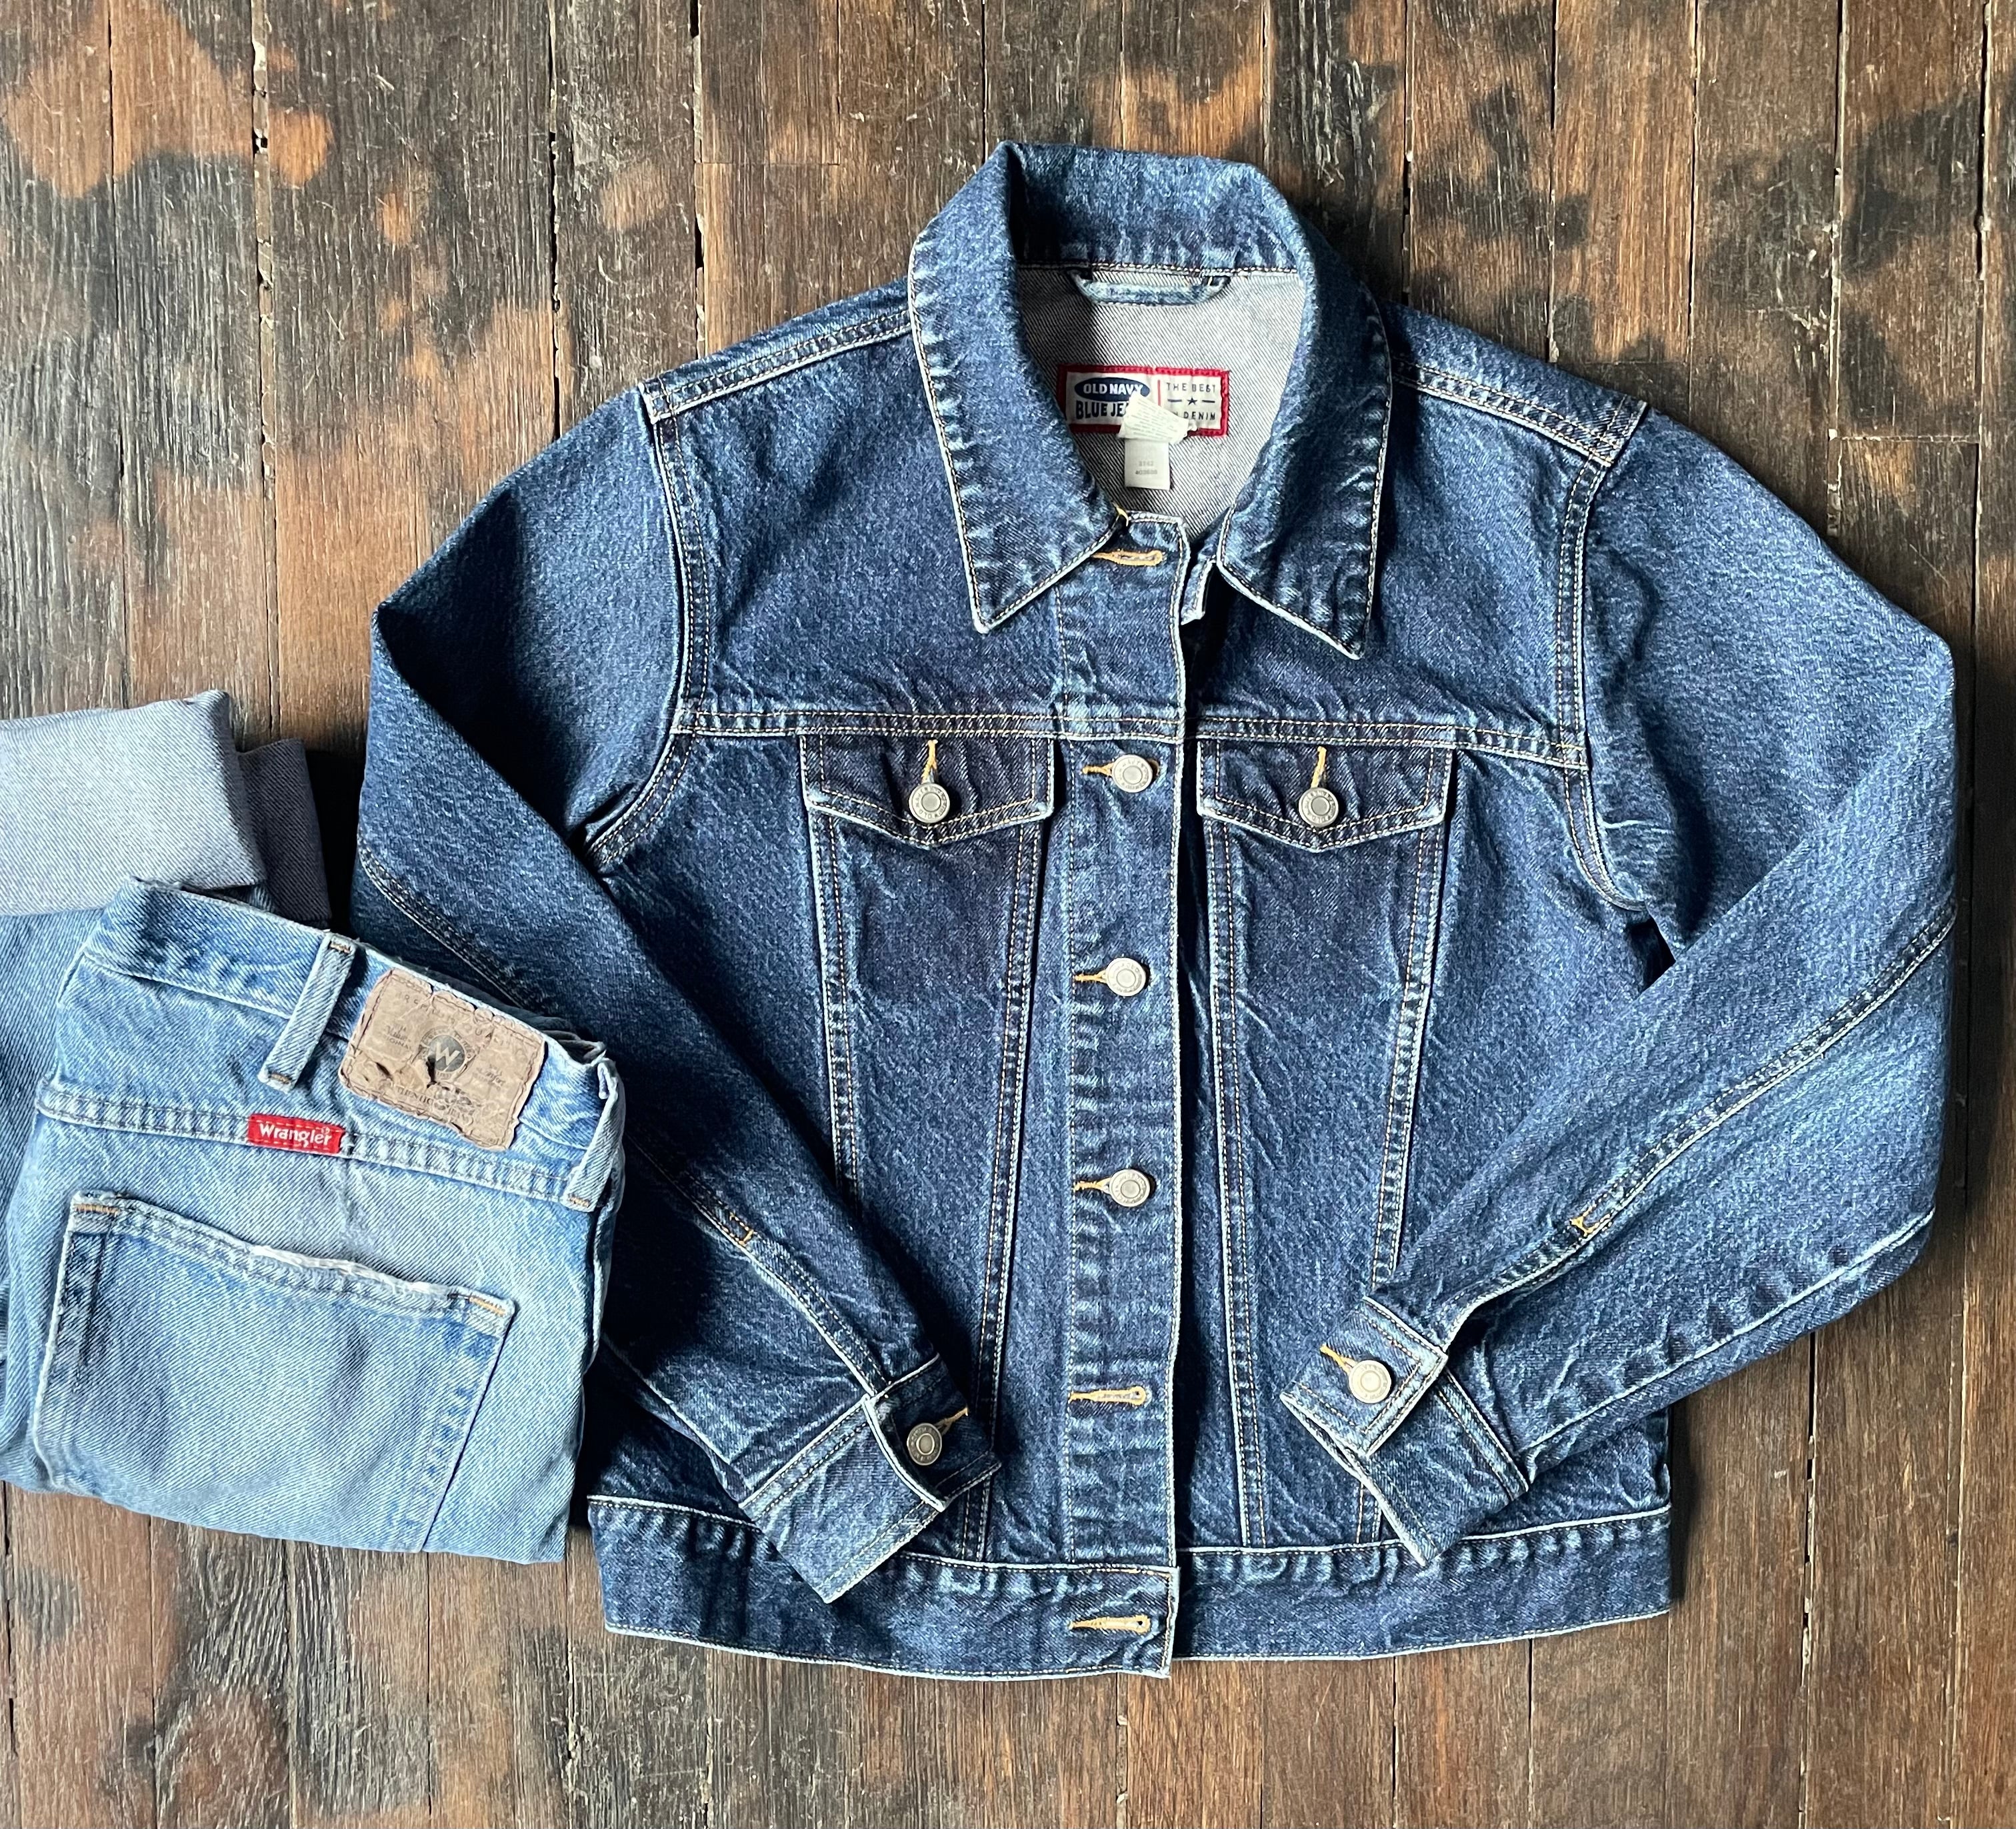 Trucker Jackets: Top 6 Fits & Styling for Men & Women | Off The Cuff